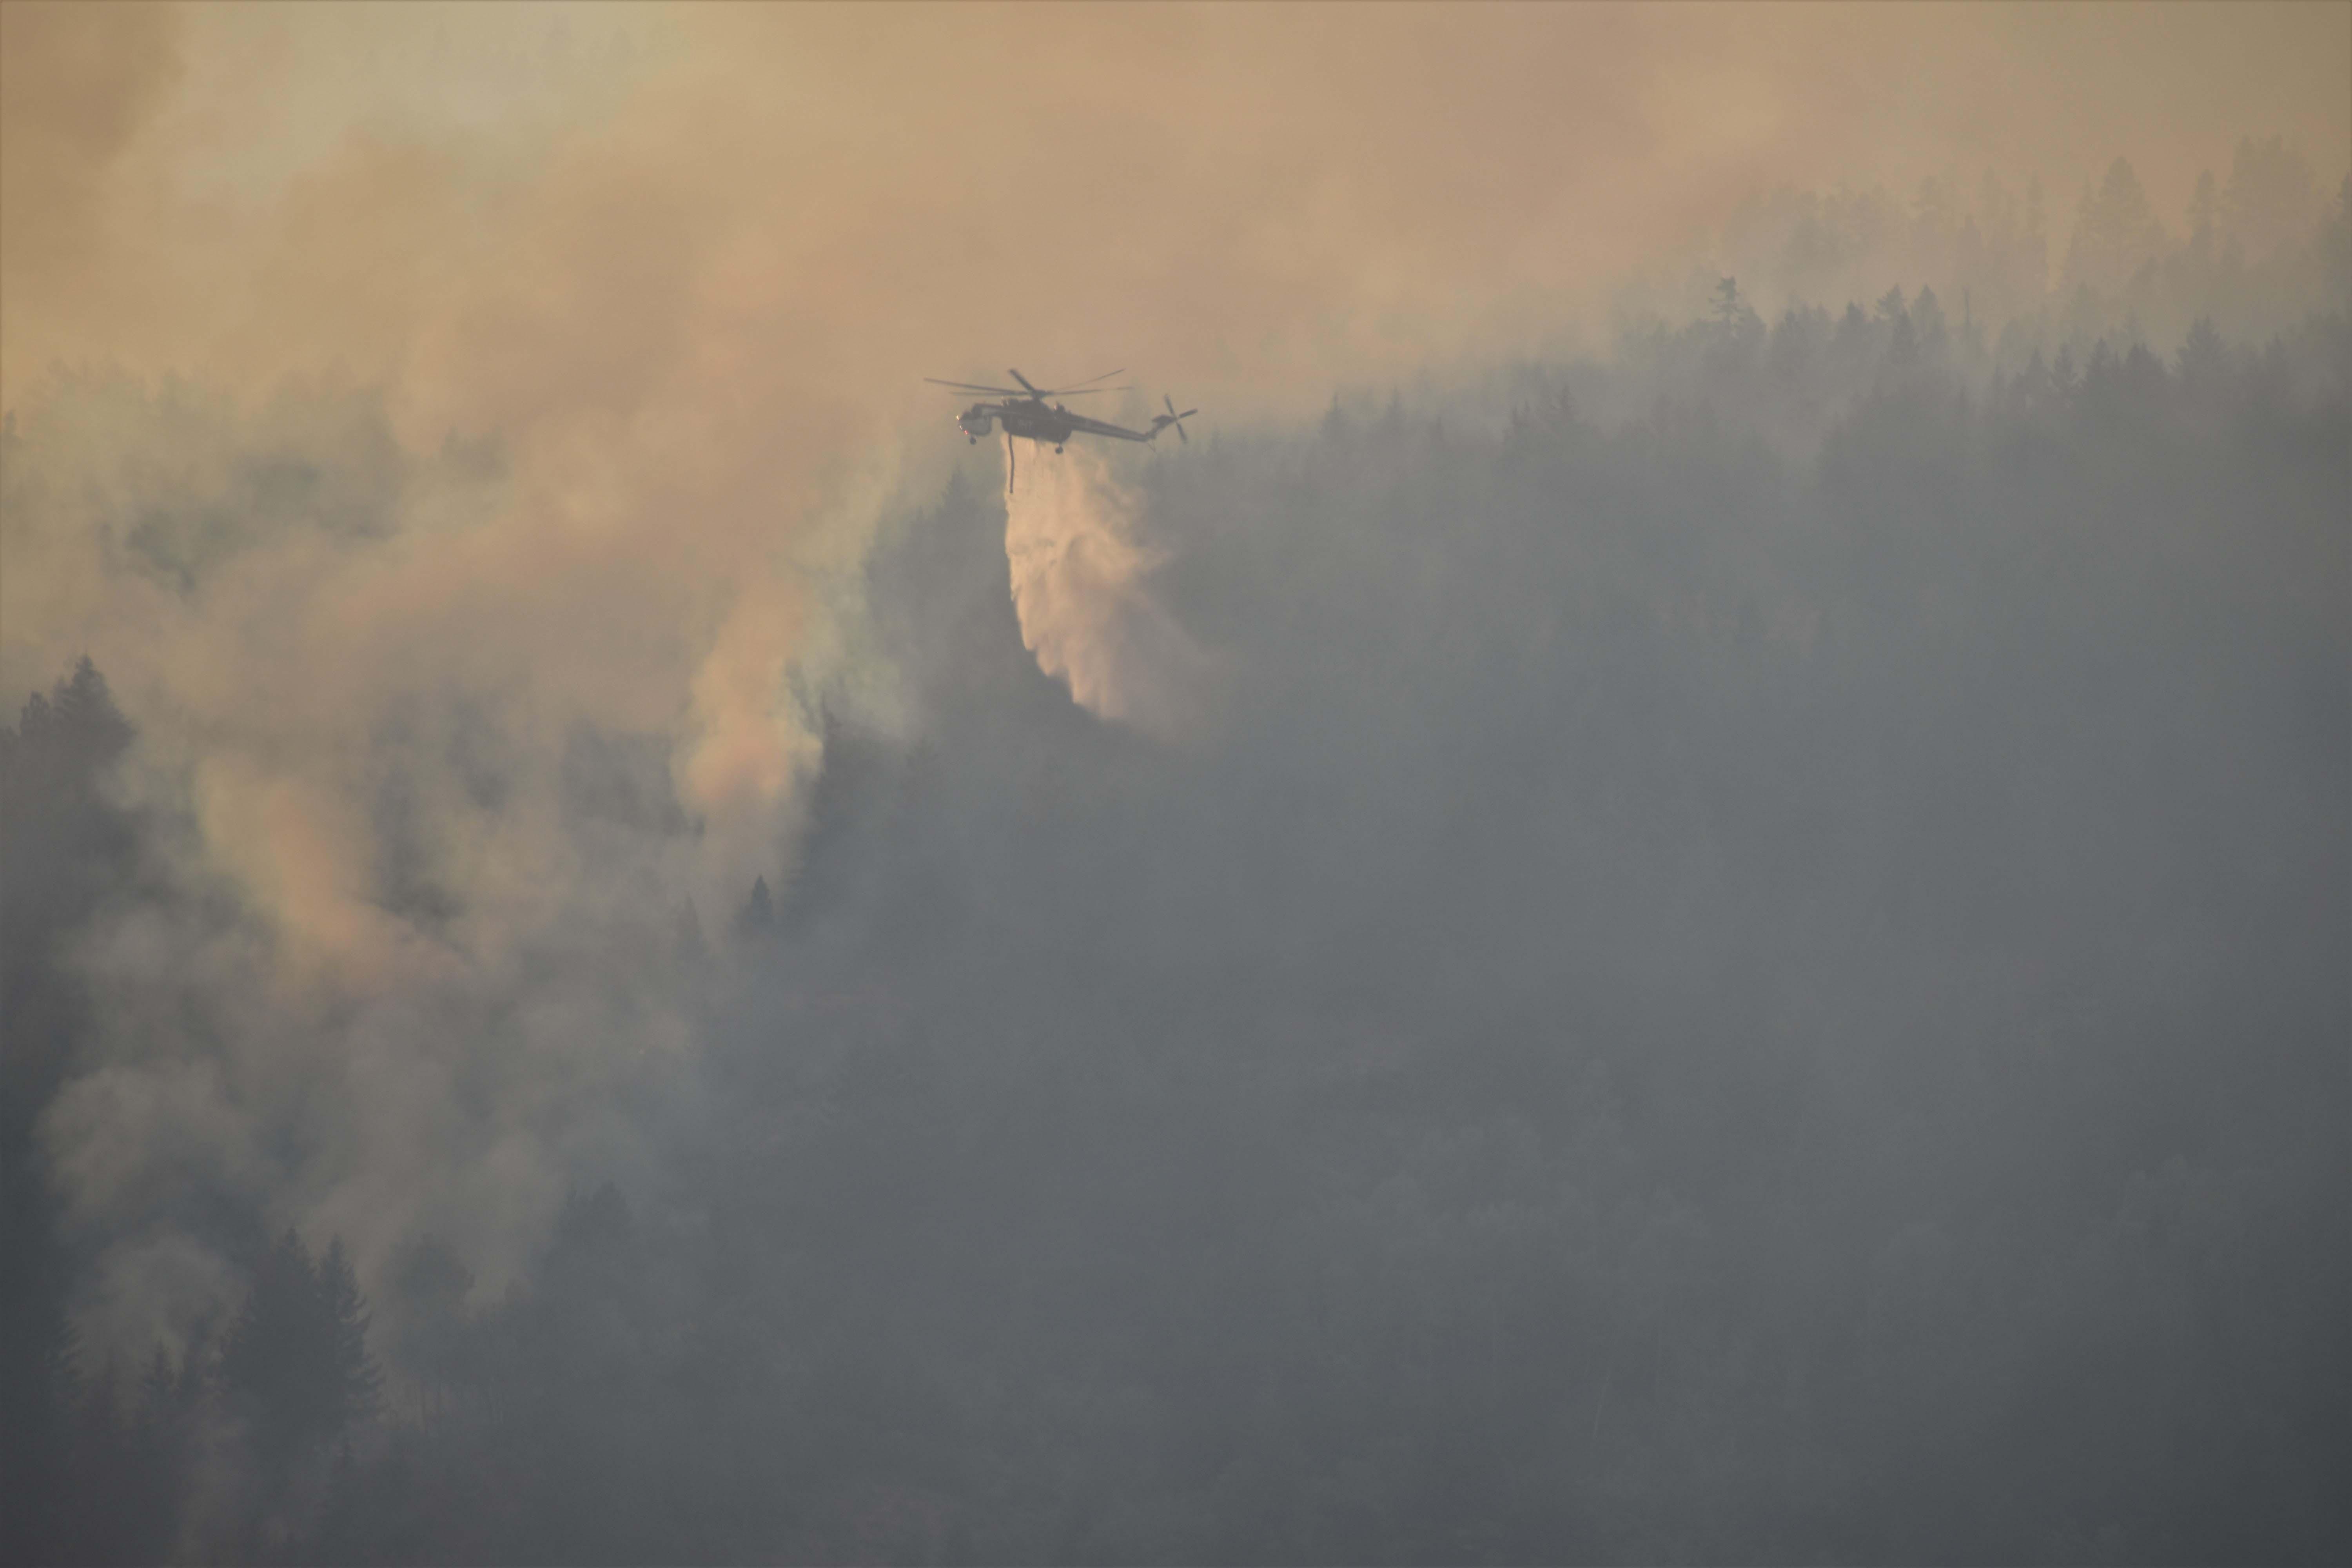 Type 1 Helicopter dropping water on the Kootenai River Complex fire in a smoky conditions.